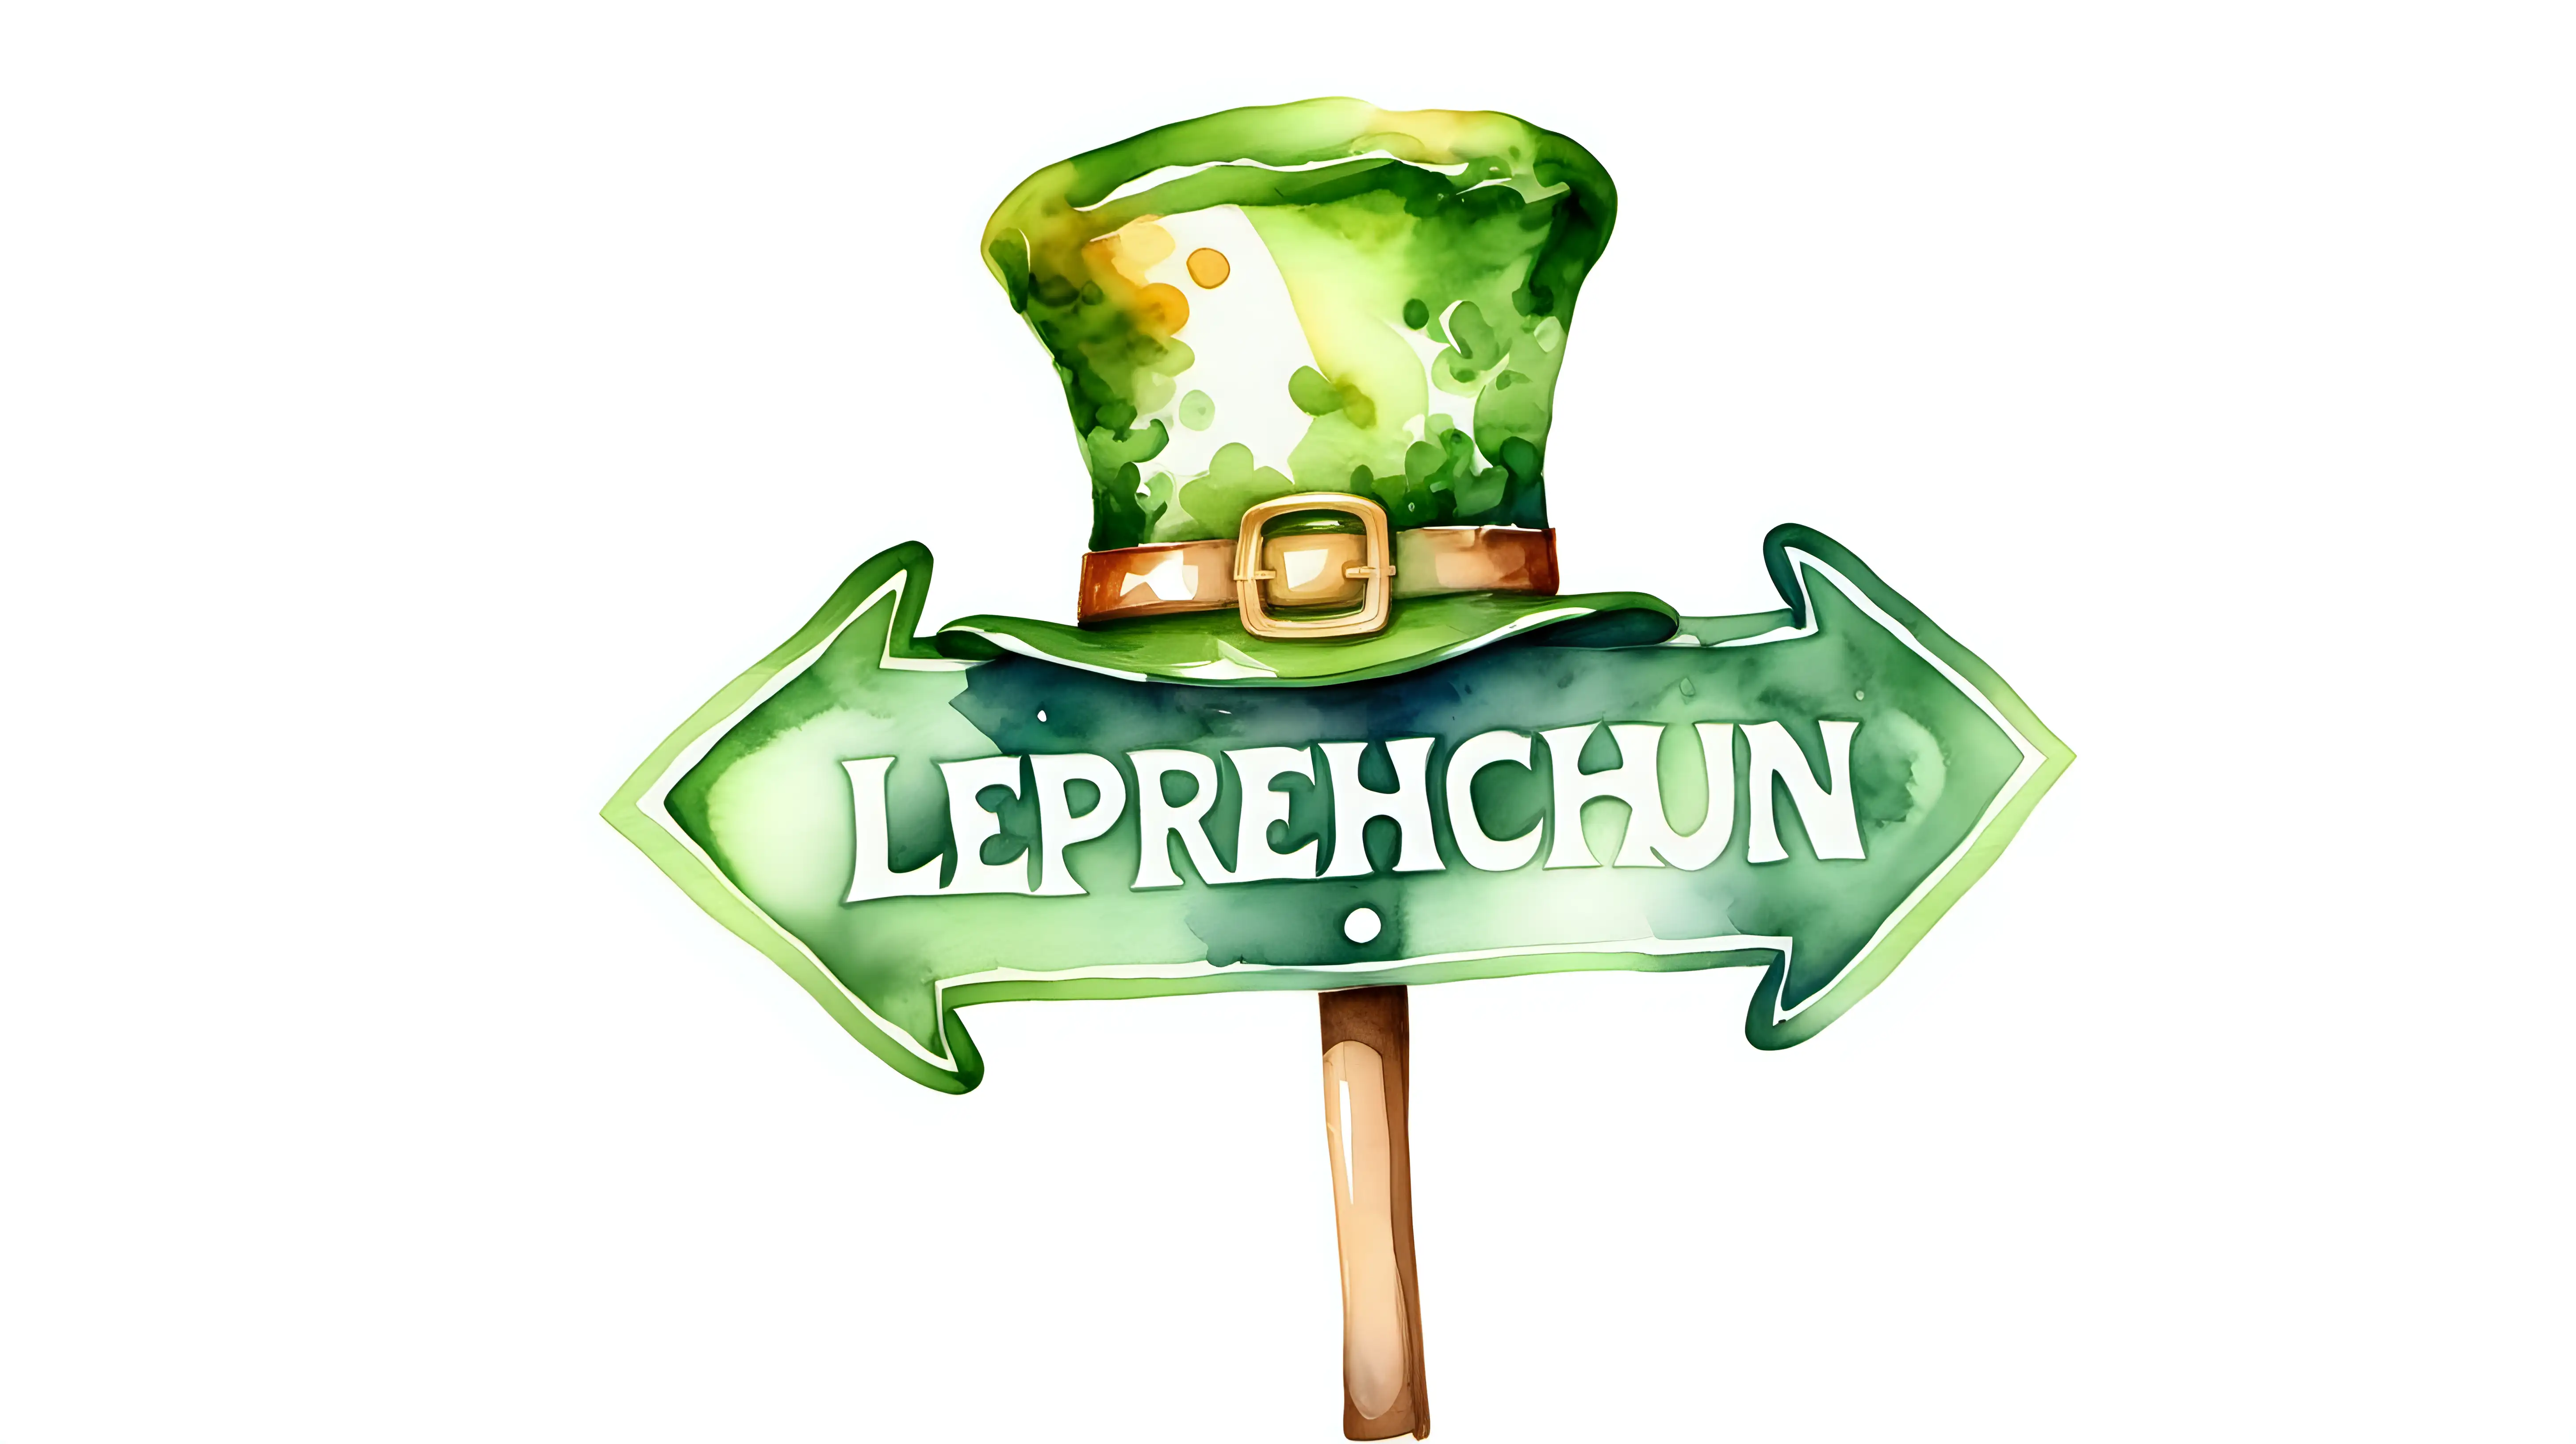 Leprechaun Hat Watercolor Drawing on White Background